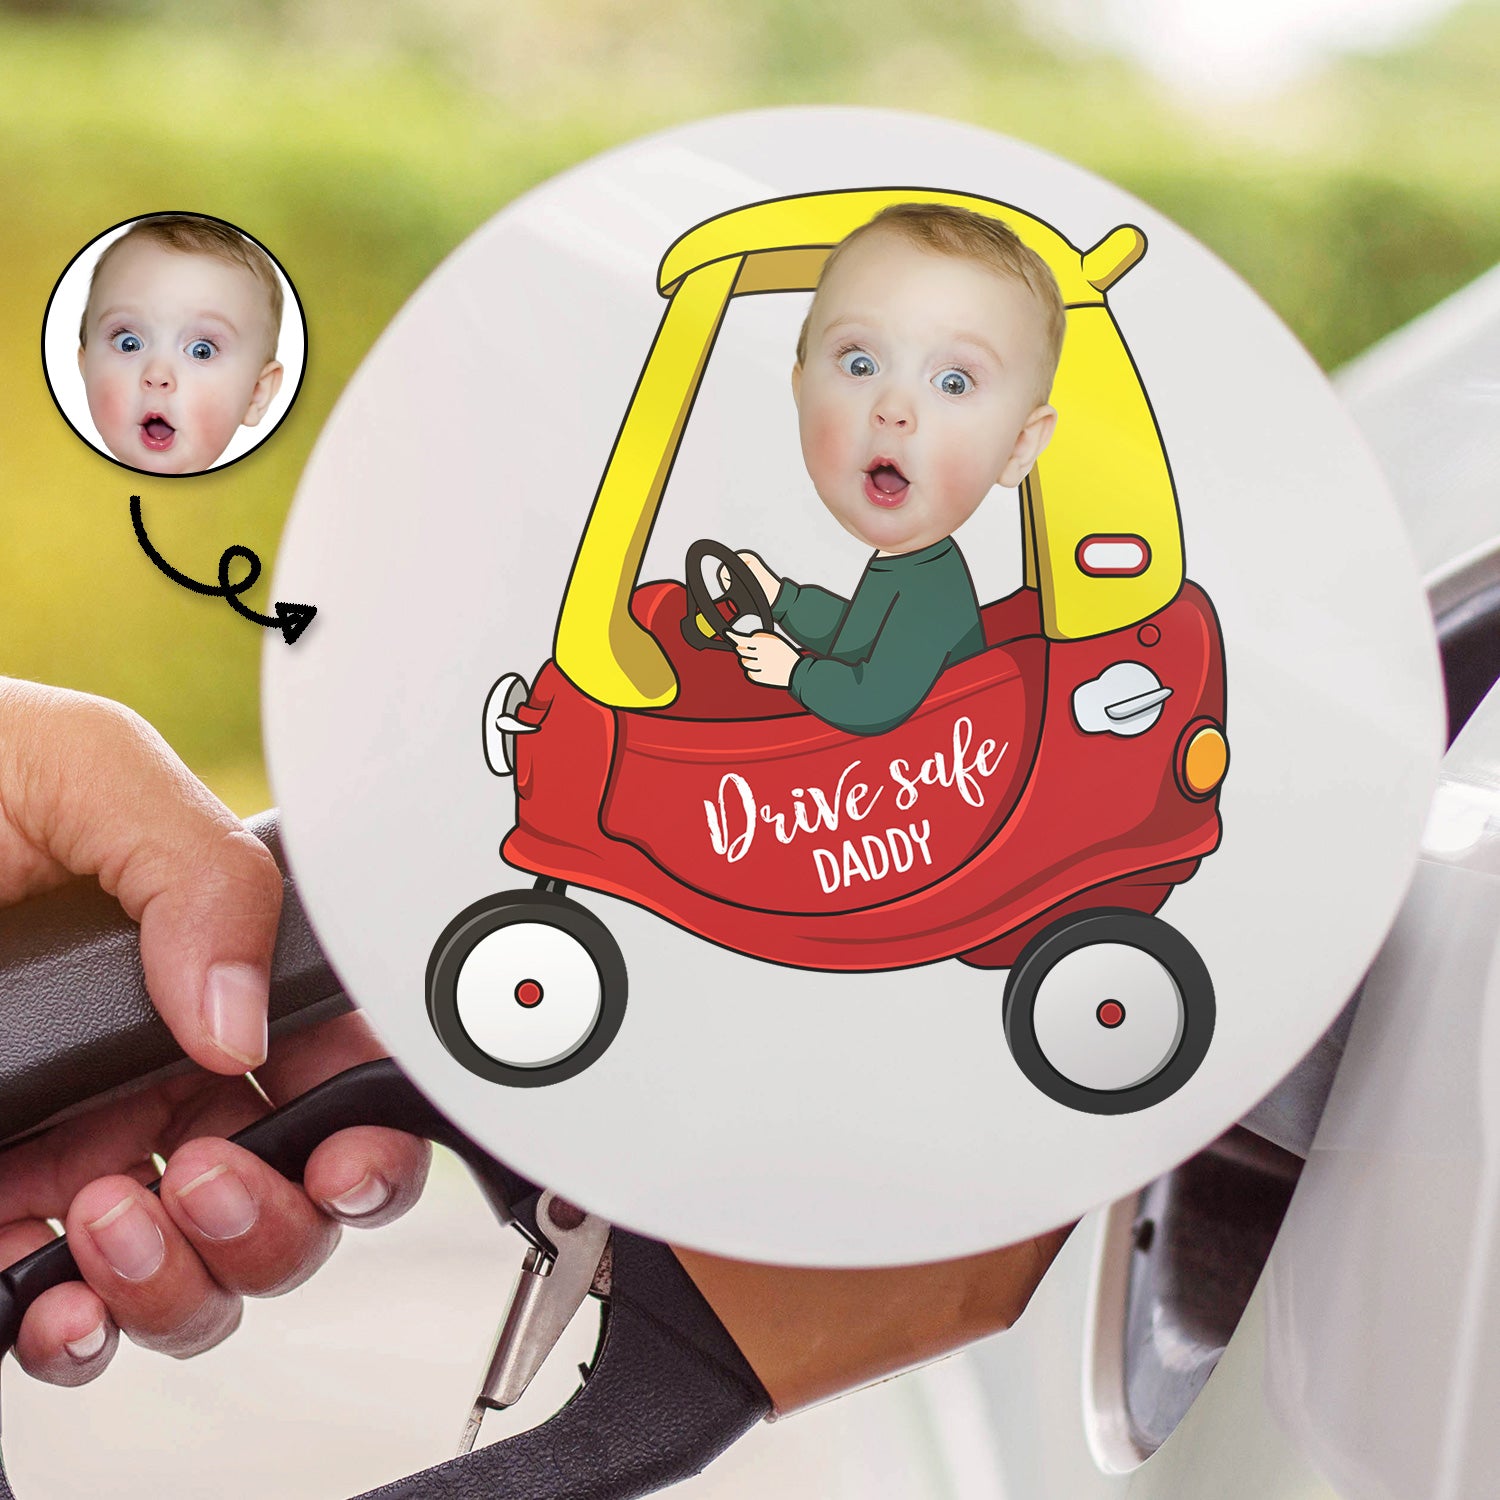 Custom Photo Drive Safe Daddy - Birthday, Loving Gift For Dad, Father, Papa, Grandpa - Personalized Camping Decal, Decor Decal